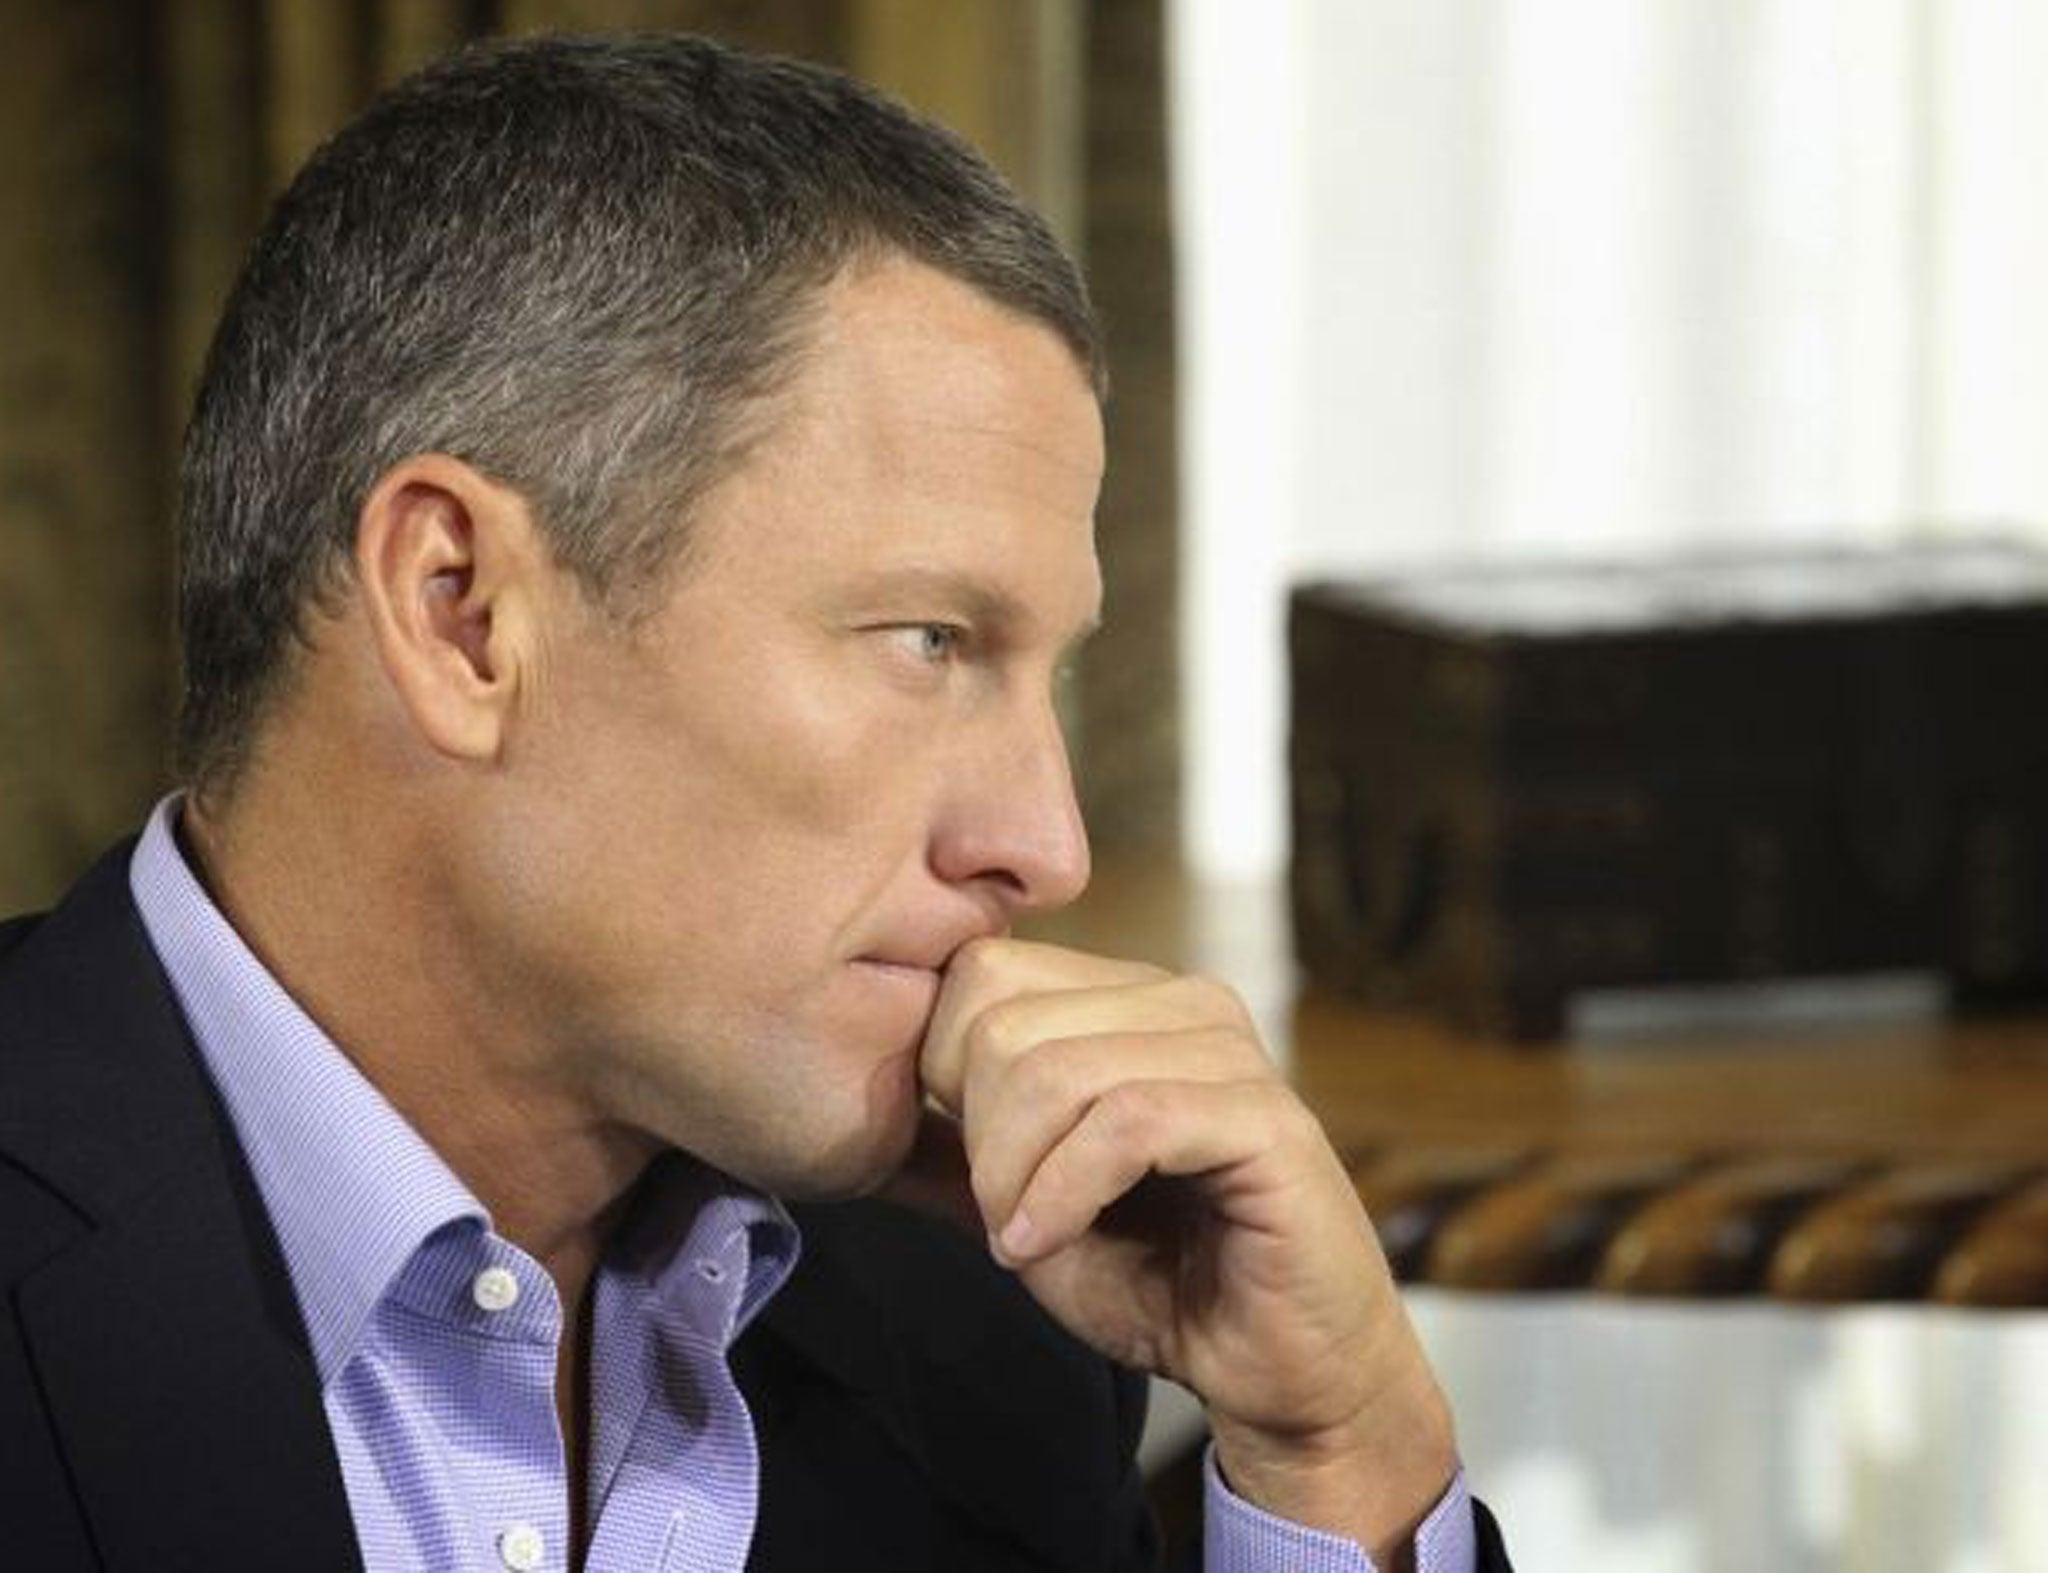 Disgraced former champ Lance Armstrong: "I didn’t invent doping. It didn’t stop with me either"